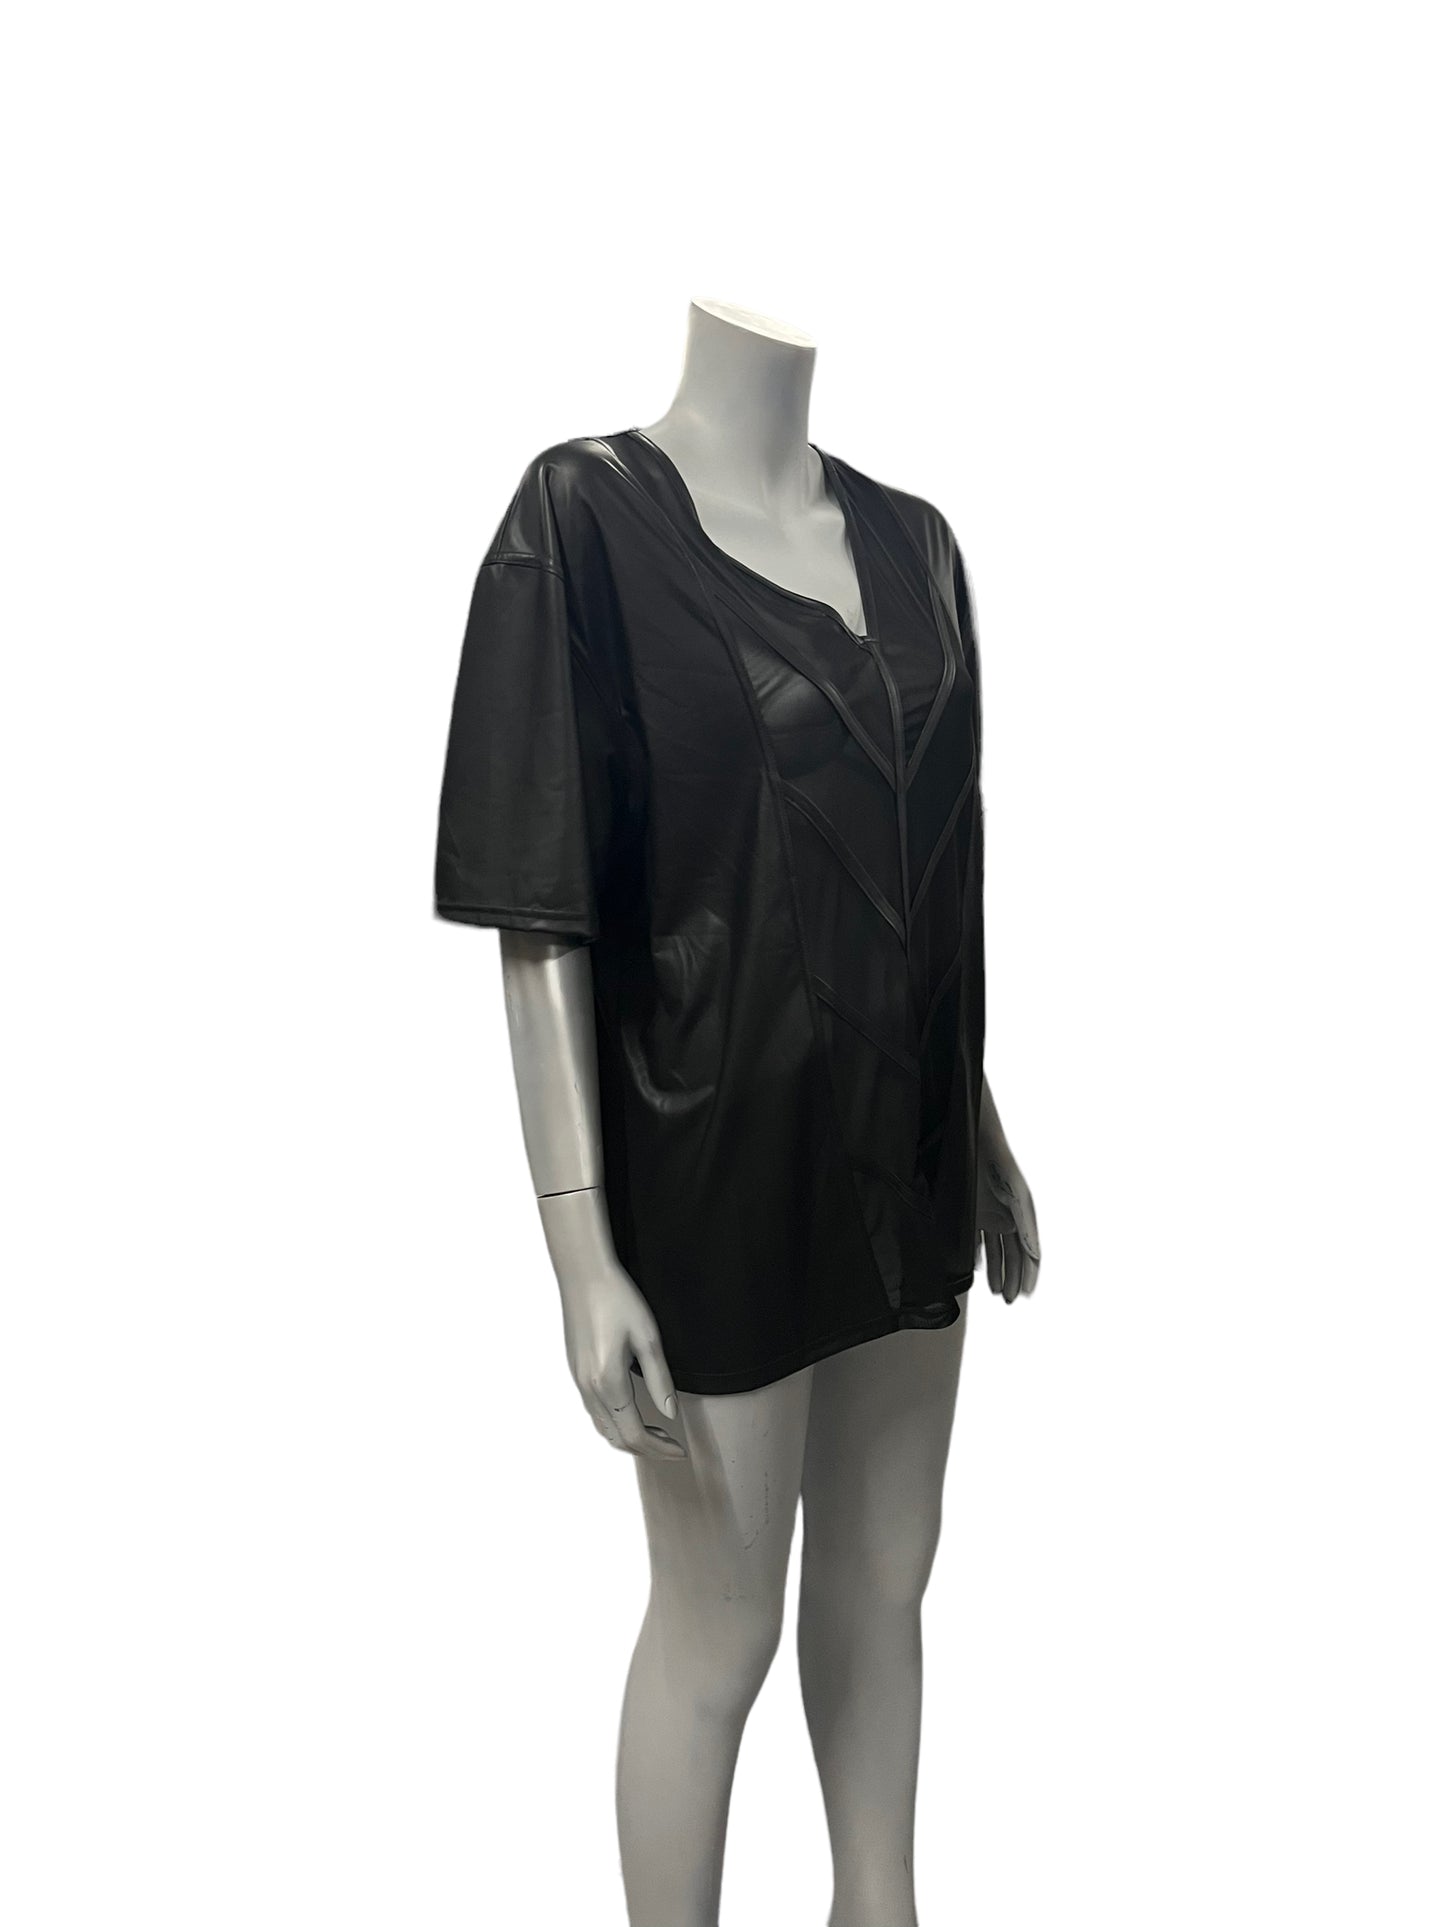 Noir - LL18 - Black Shirt with Sheer Front - Size XXL